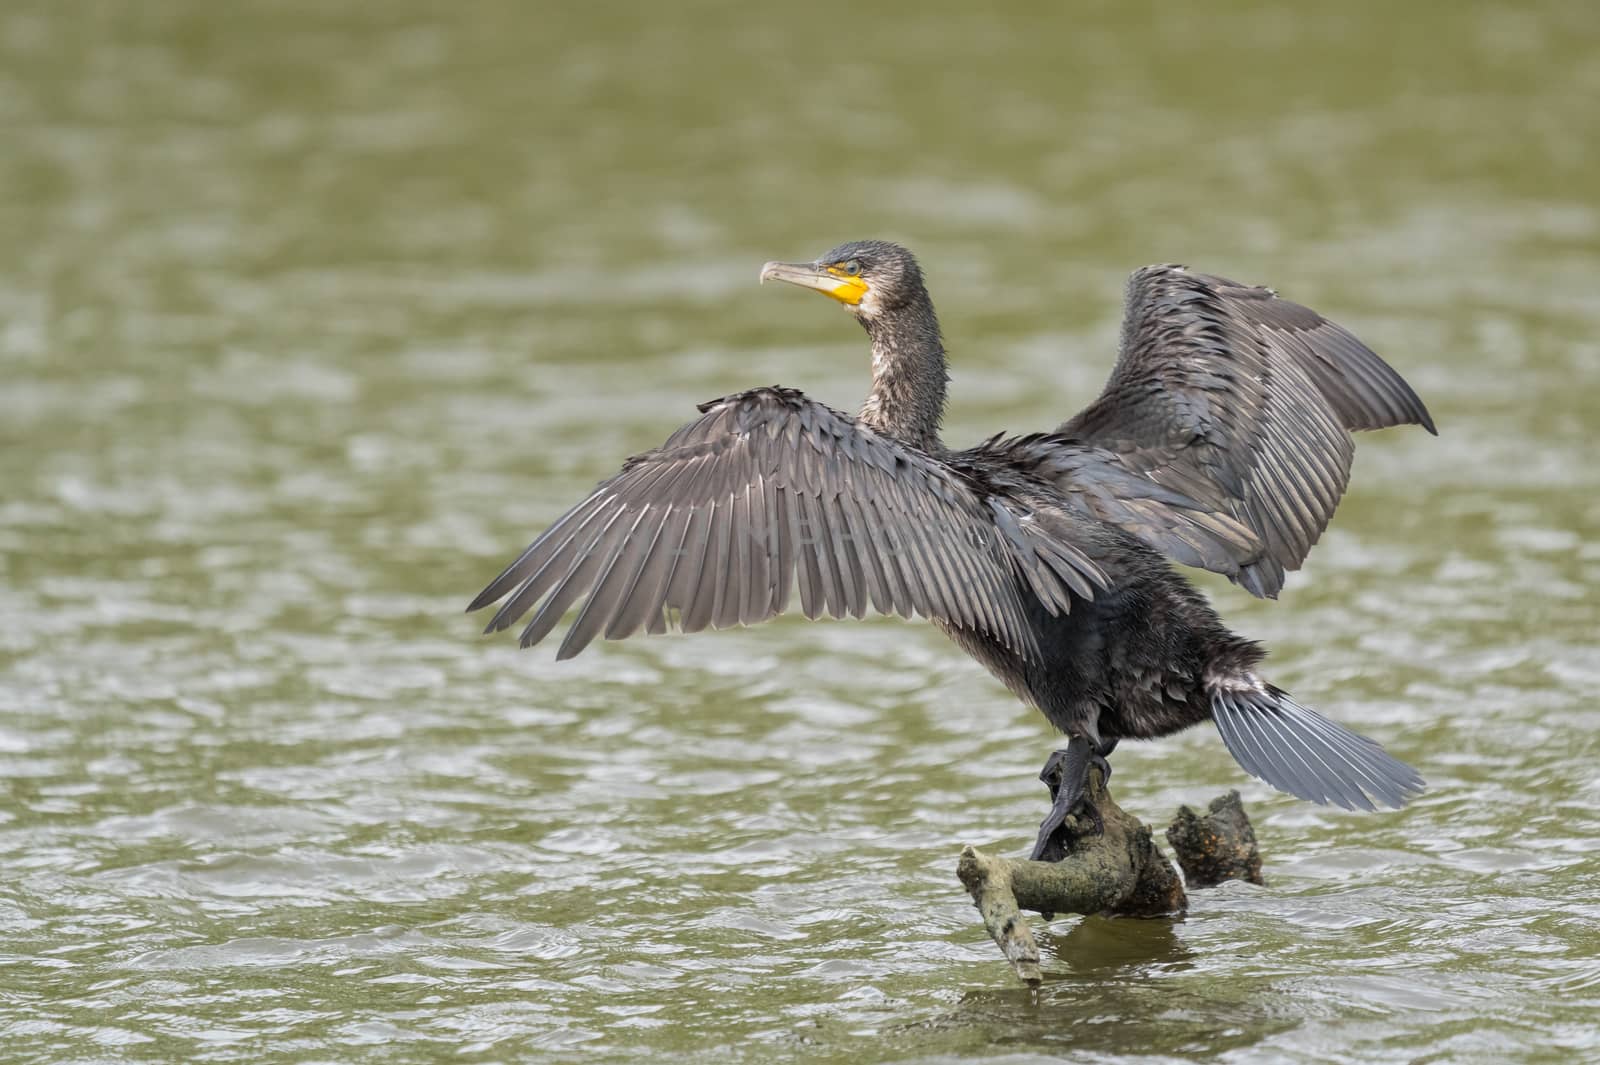 great black cormorant drying its plumage after fishing by EduardoMT